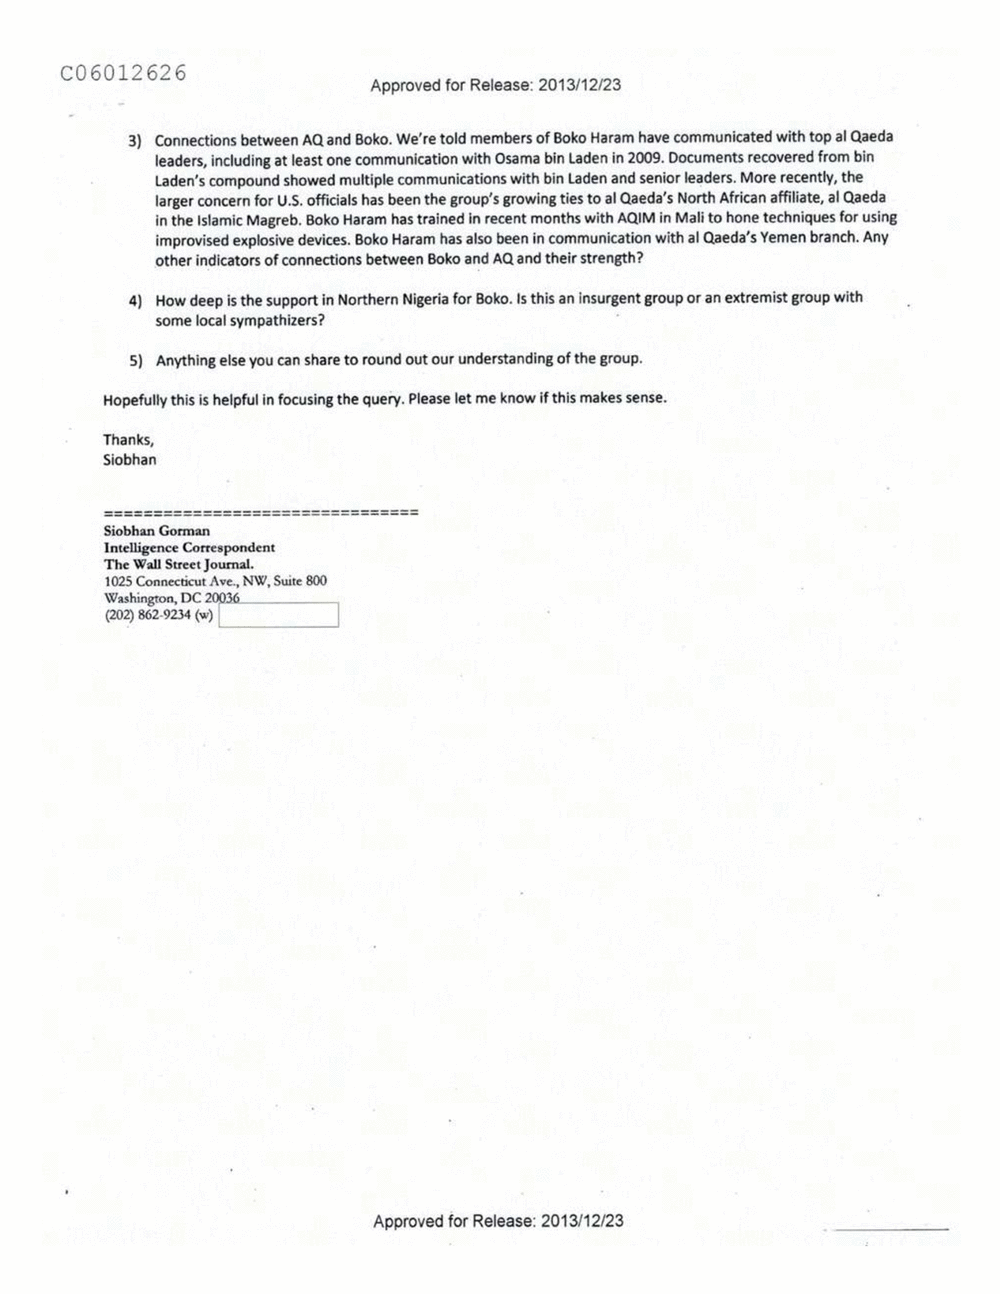 Page 182 from Email Correspondence Between Reporters and CIA Flacks